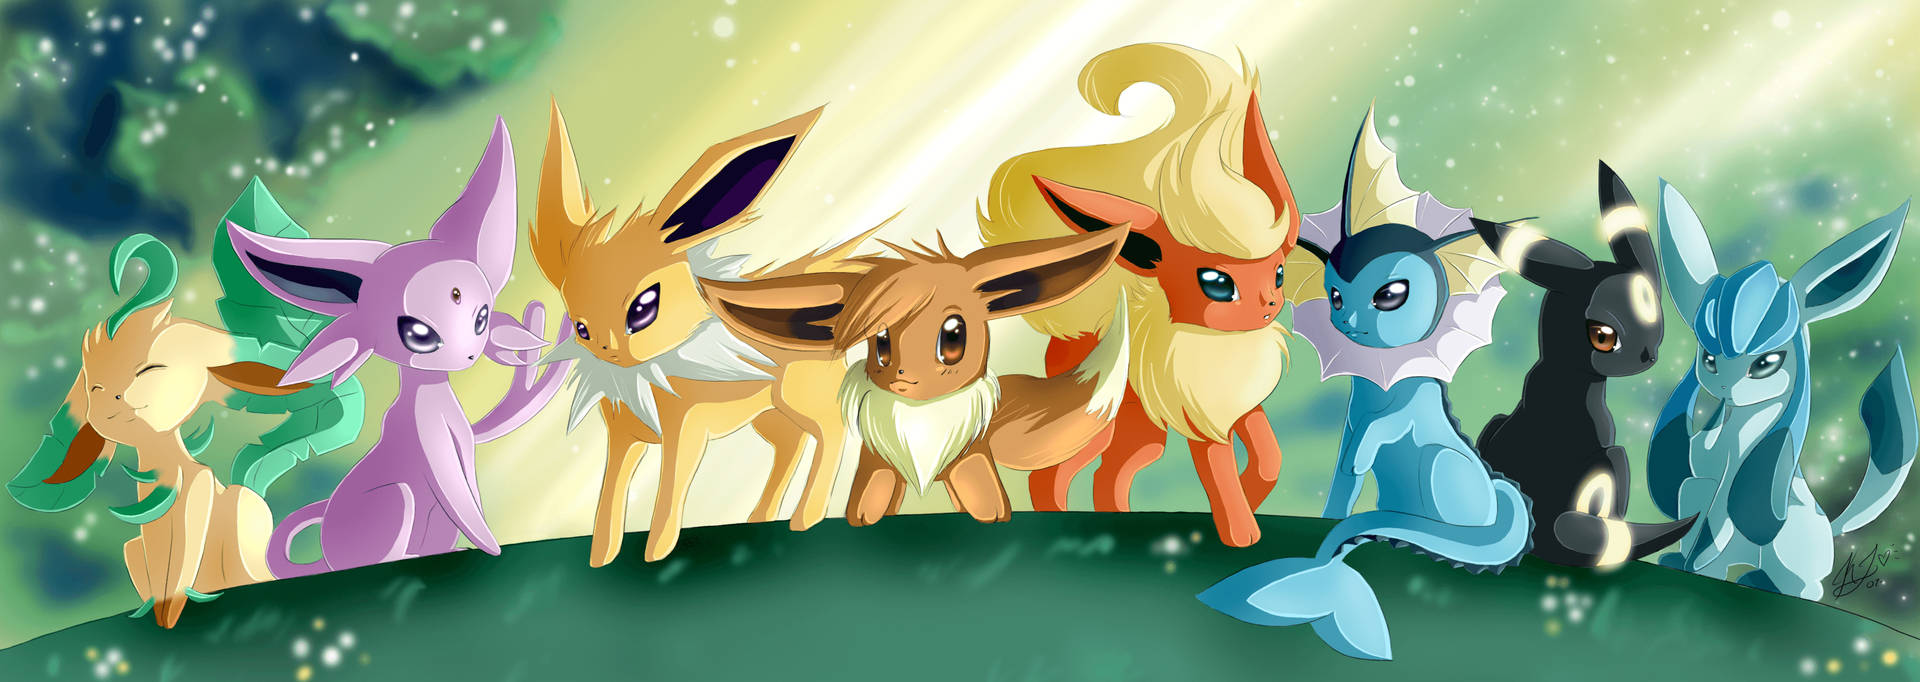 Flareon And Other Pokemon Standing Side By Side Wallpaper